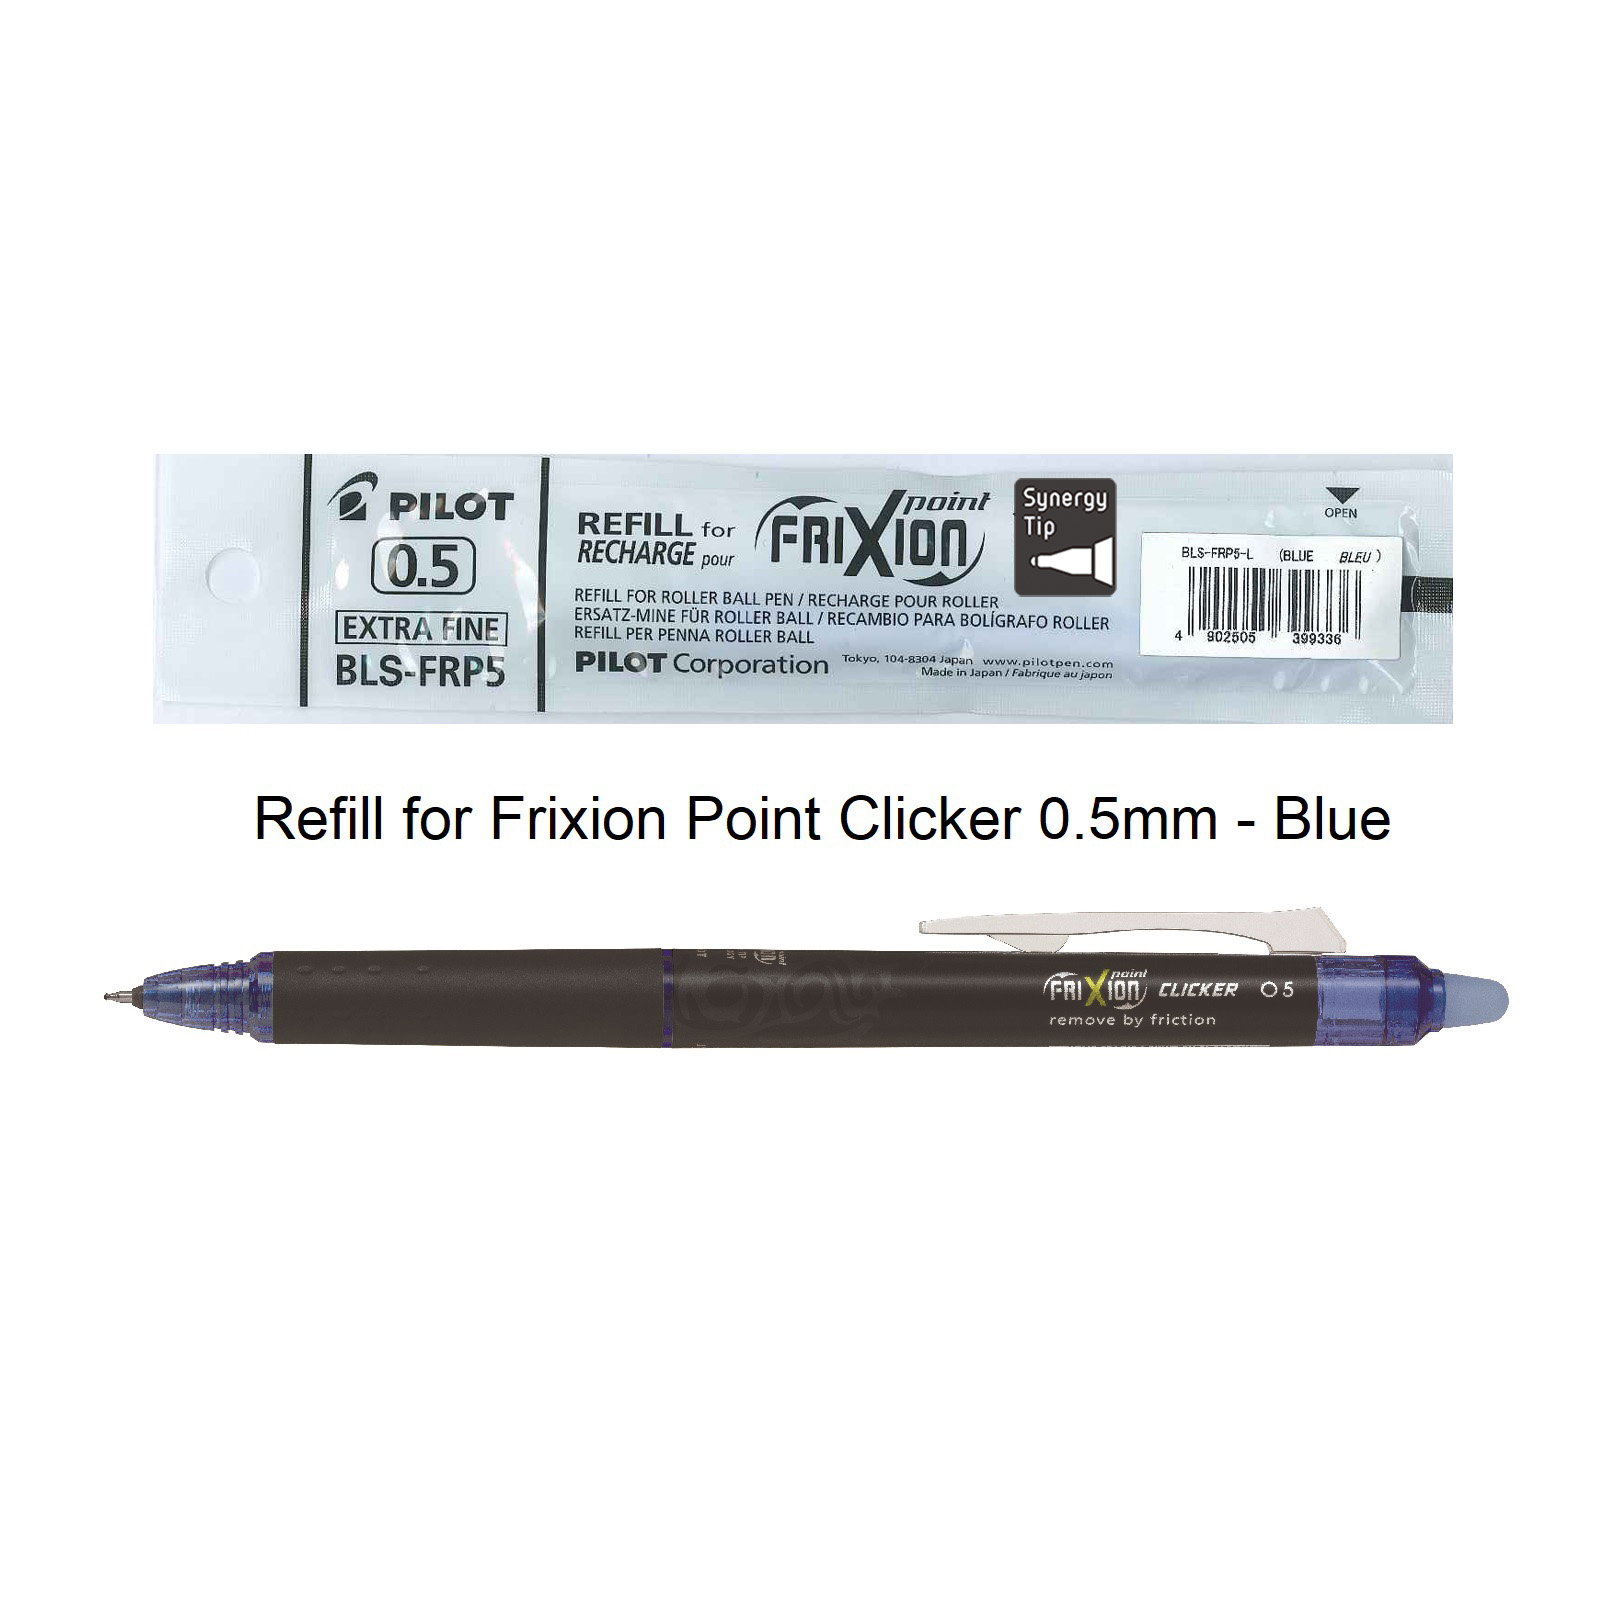 How to open & refill a Pilot FriXion Pen 